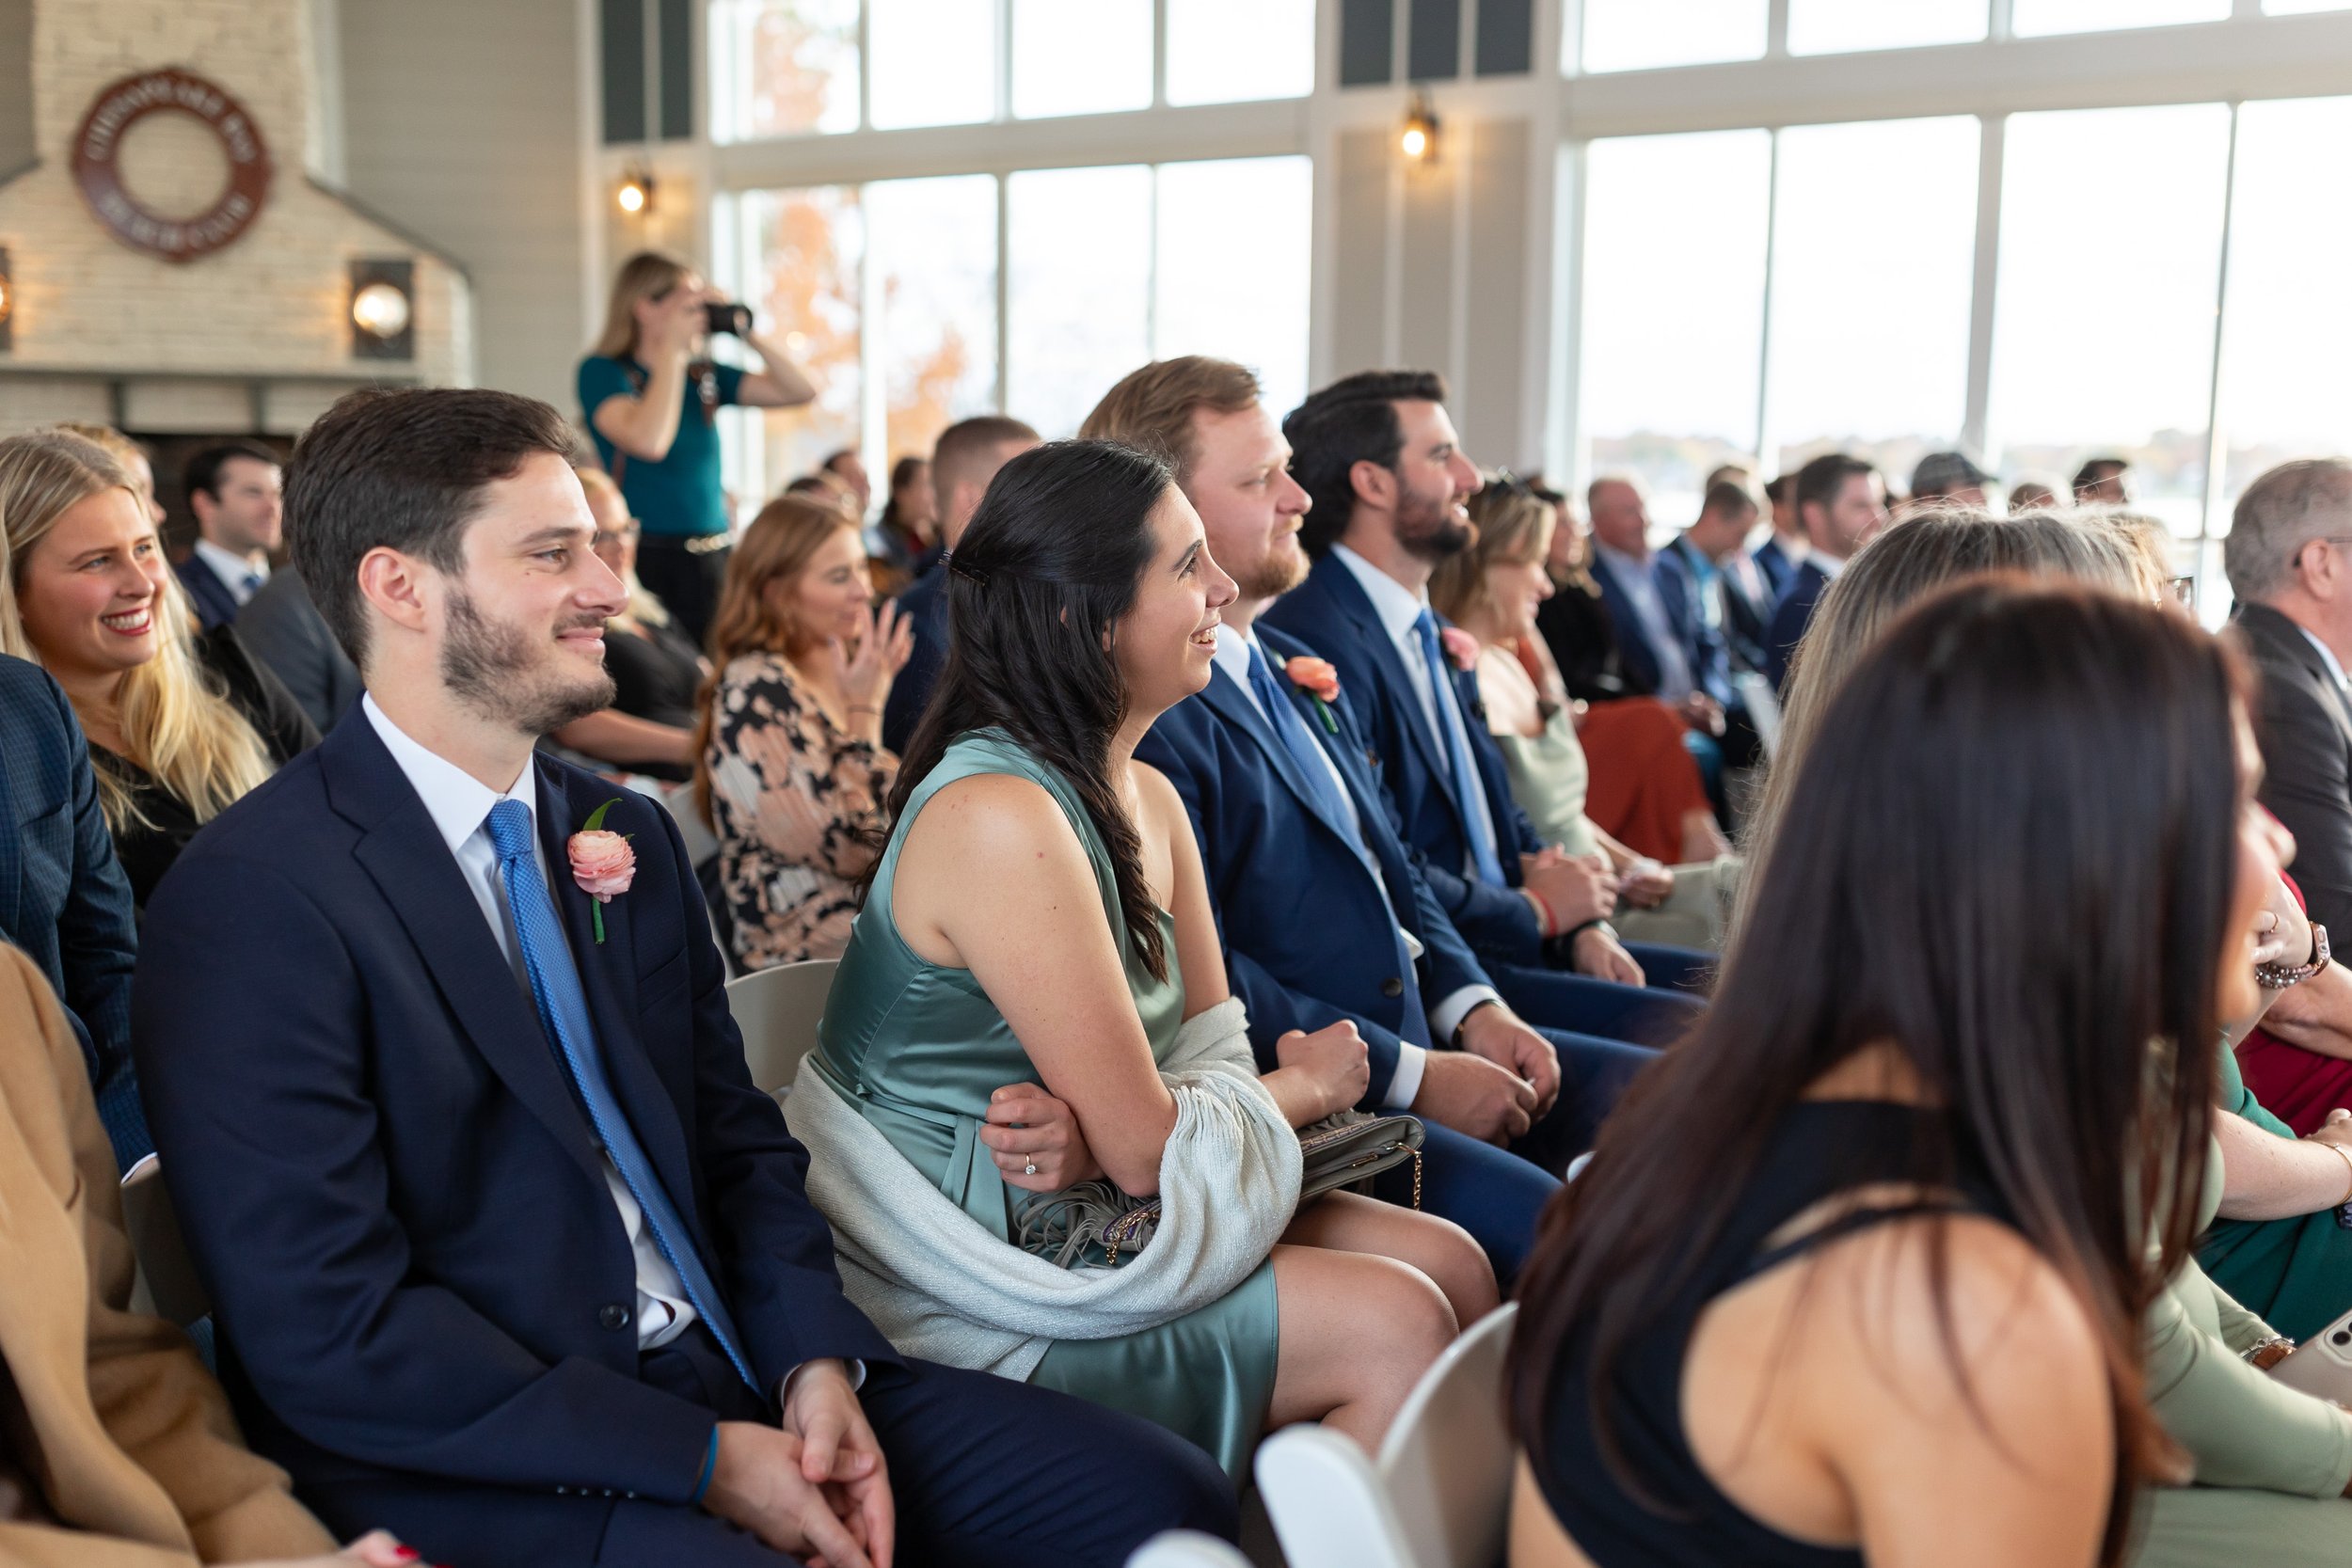 Guests laughing and smiling during wedding ceremony at Chesapeake Bay Beach Club